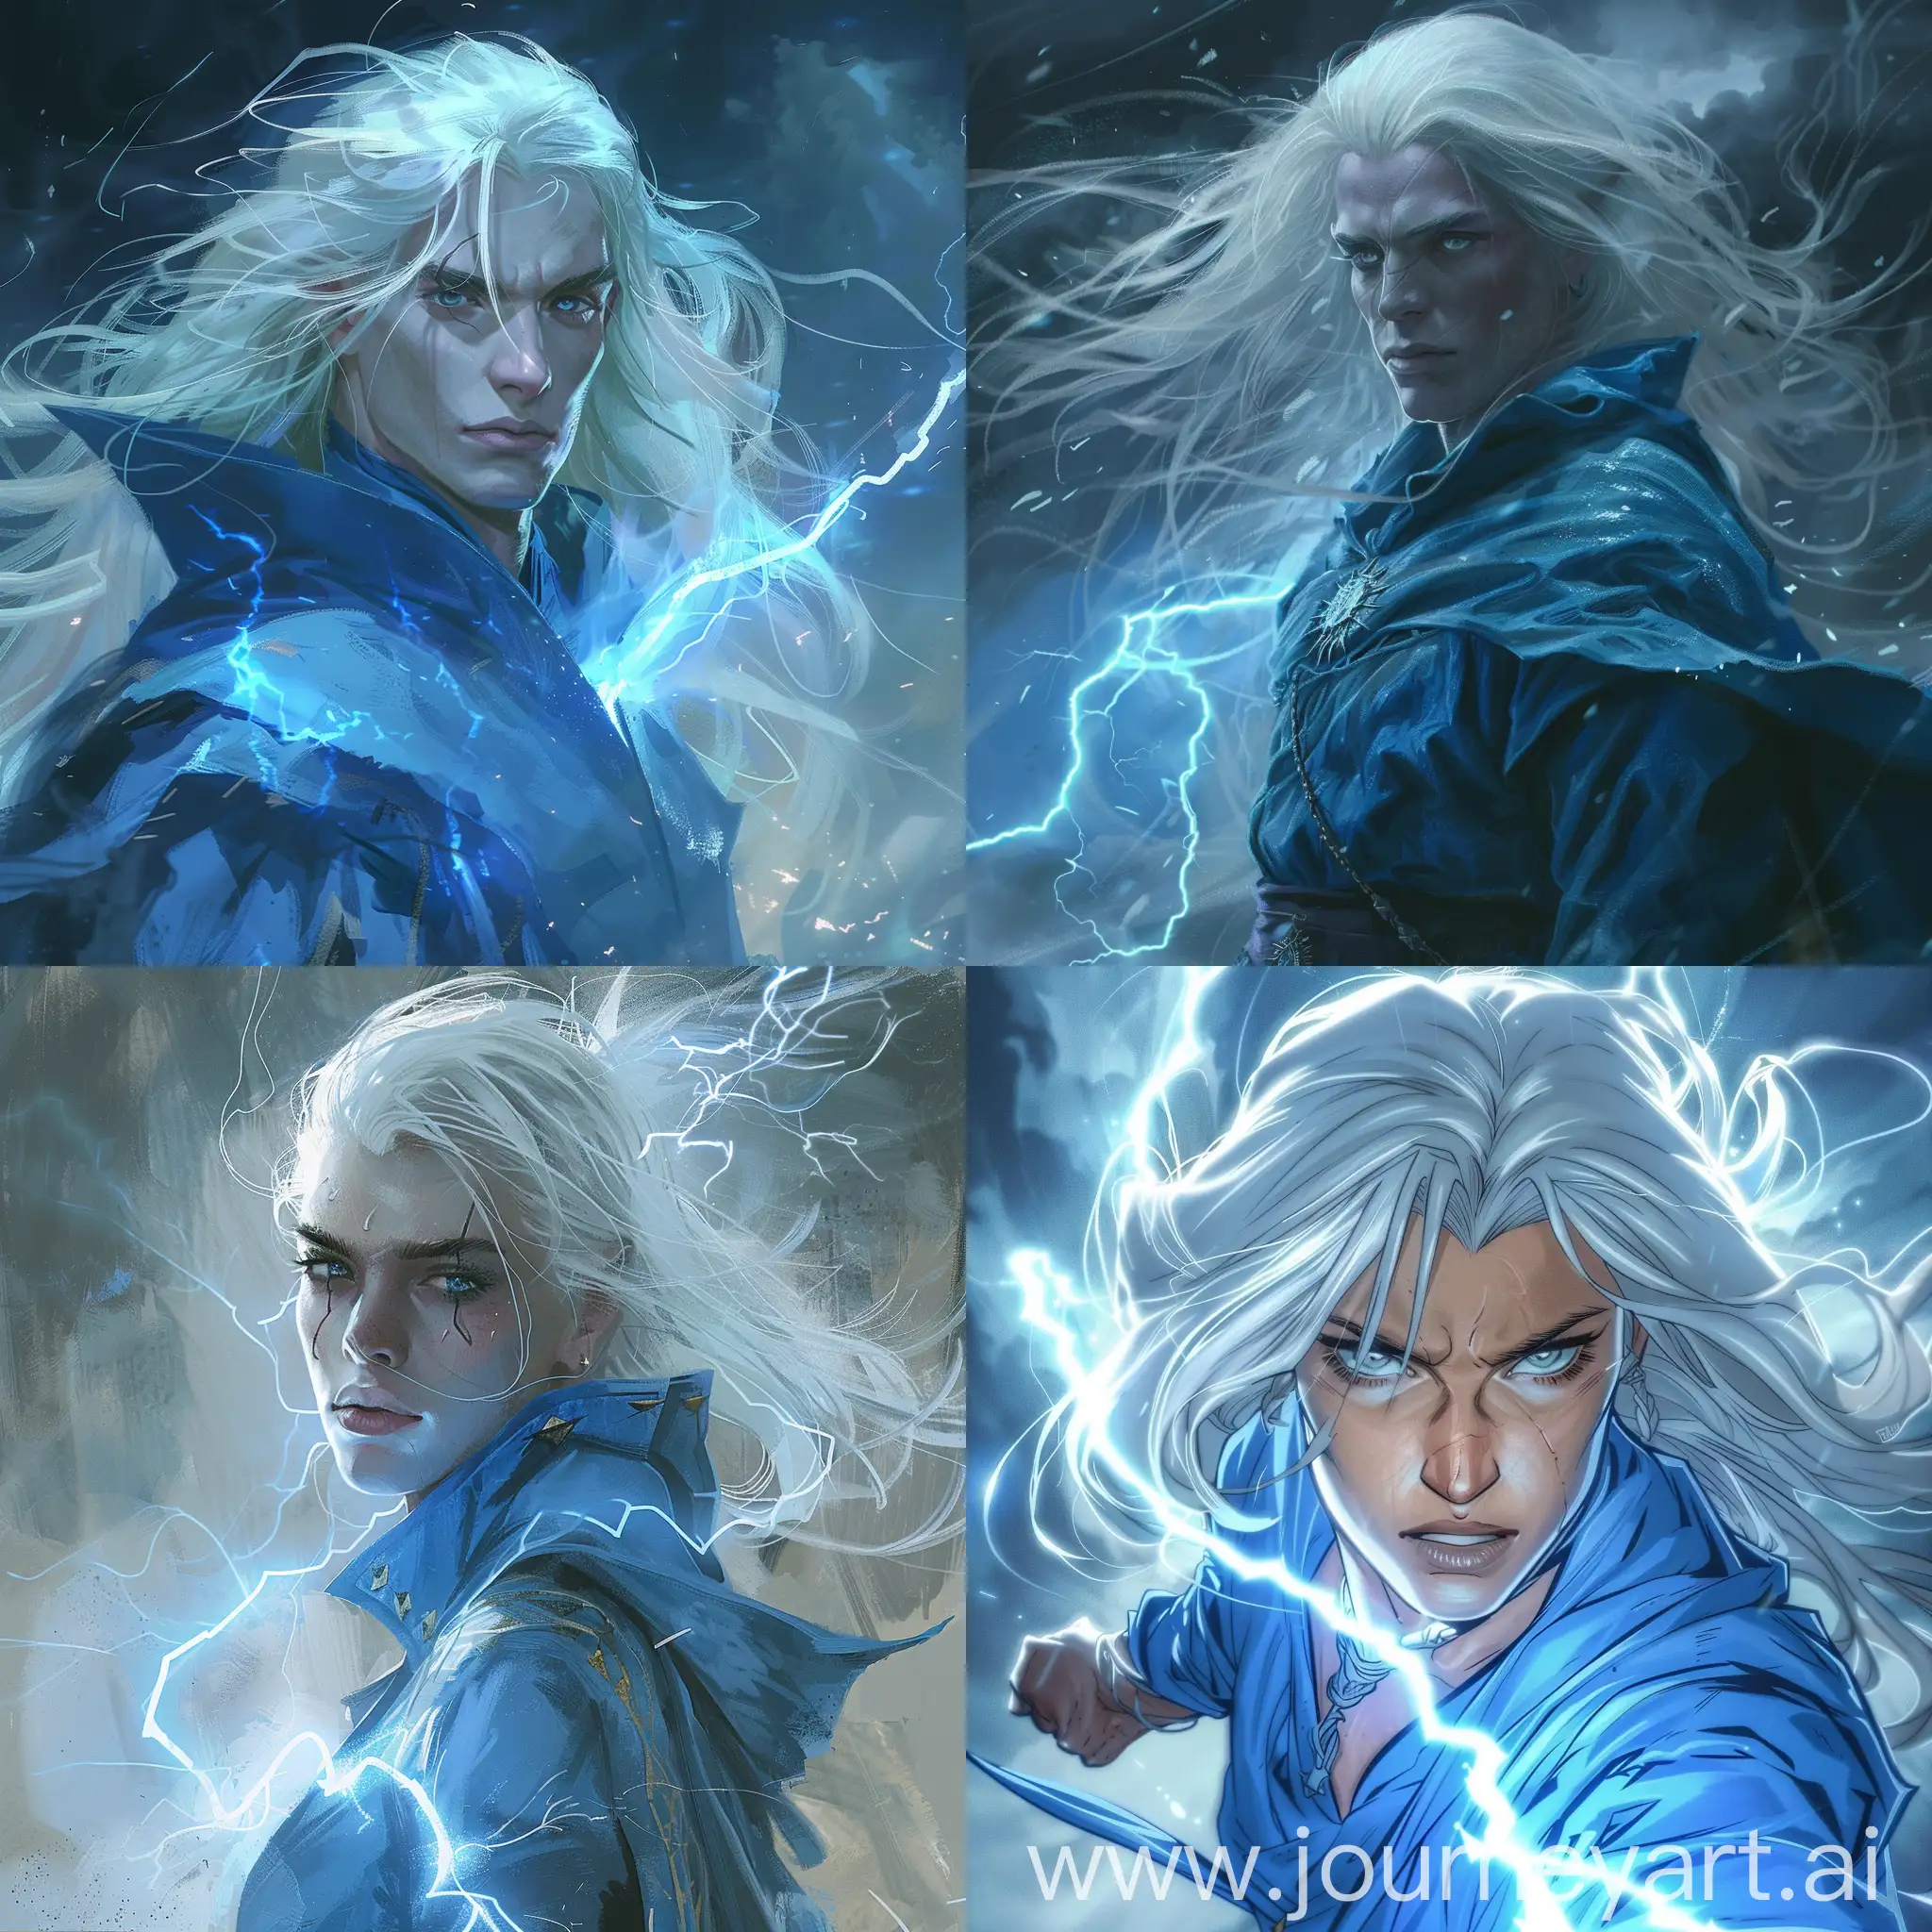 white haired,wearing a blue colored rob,lightning mage staring